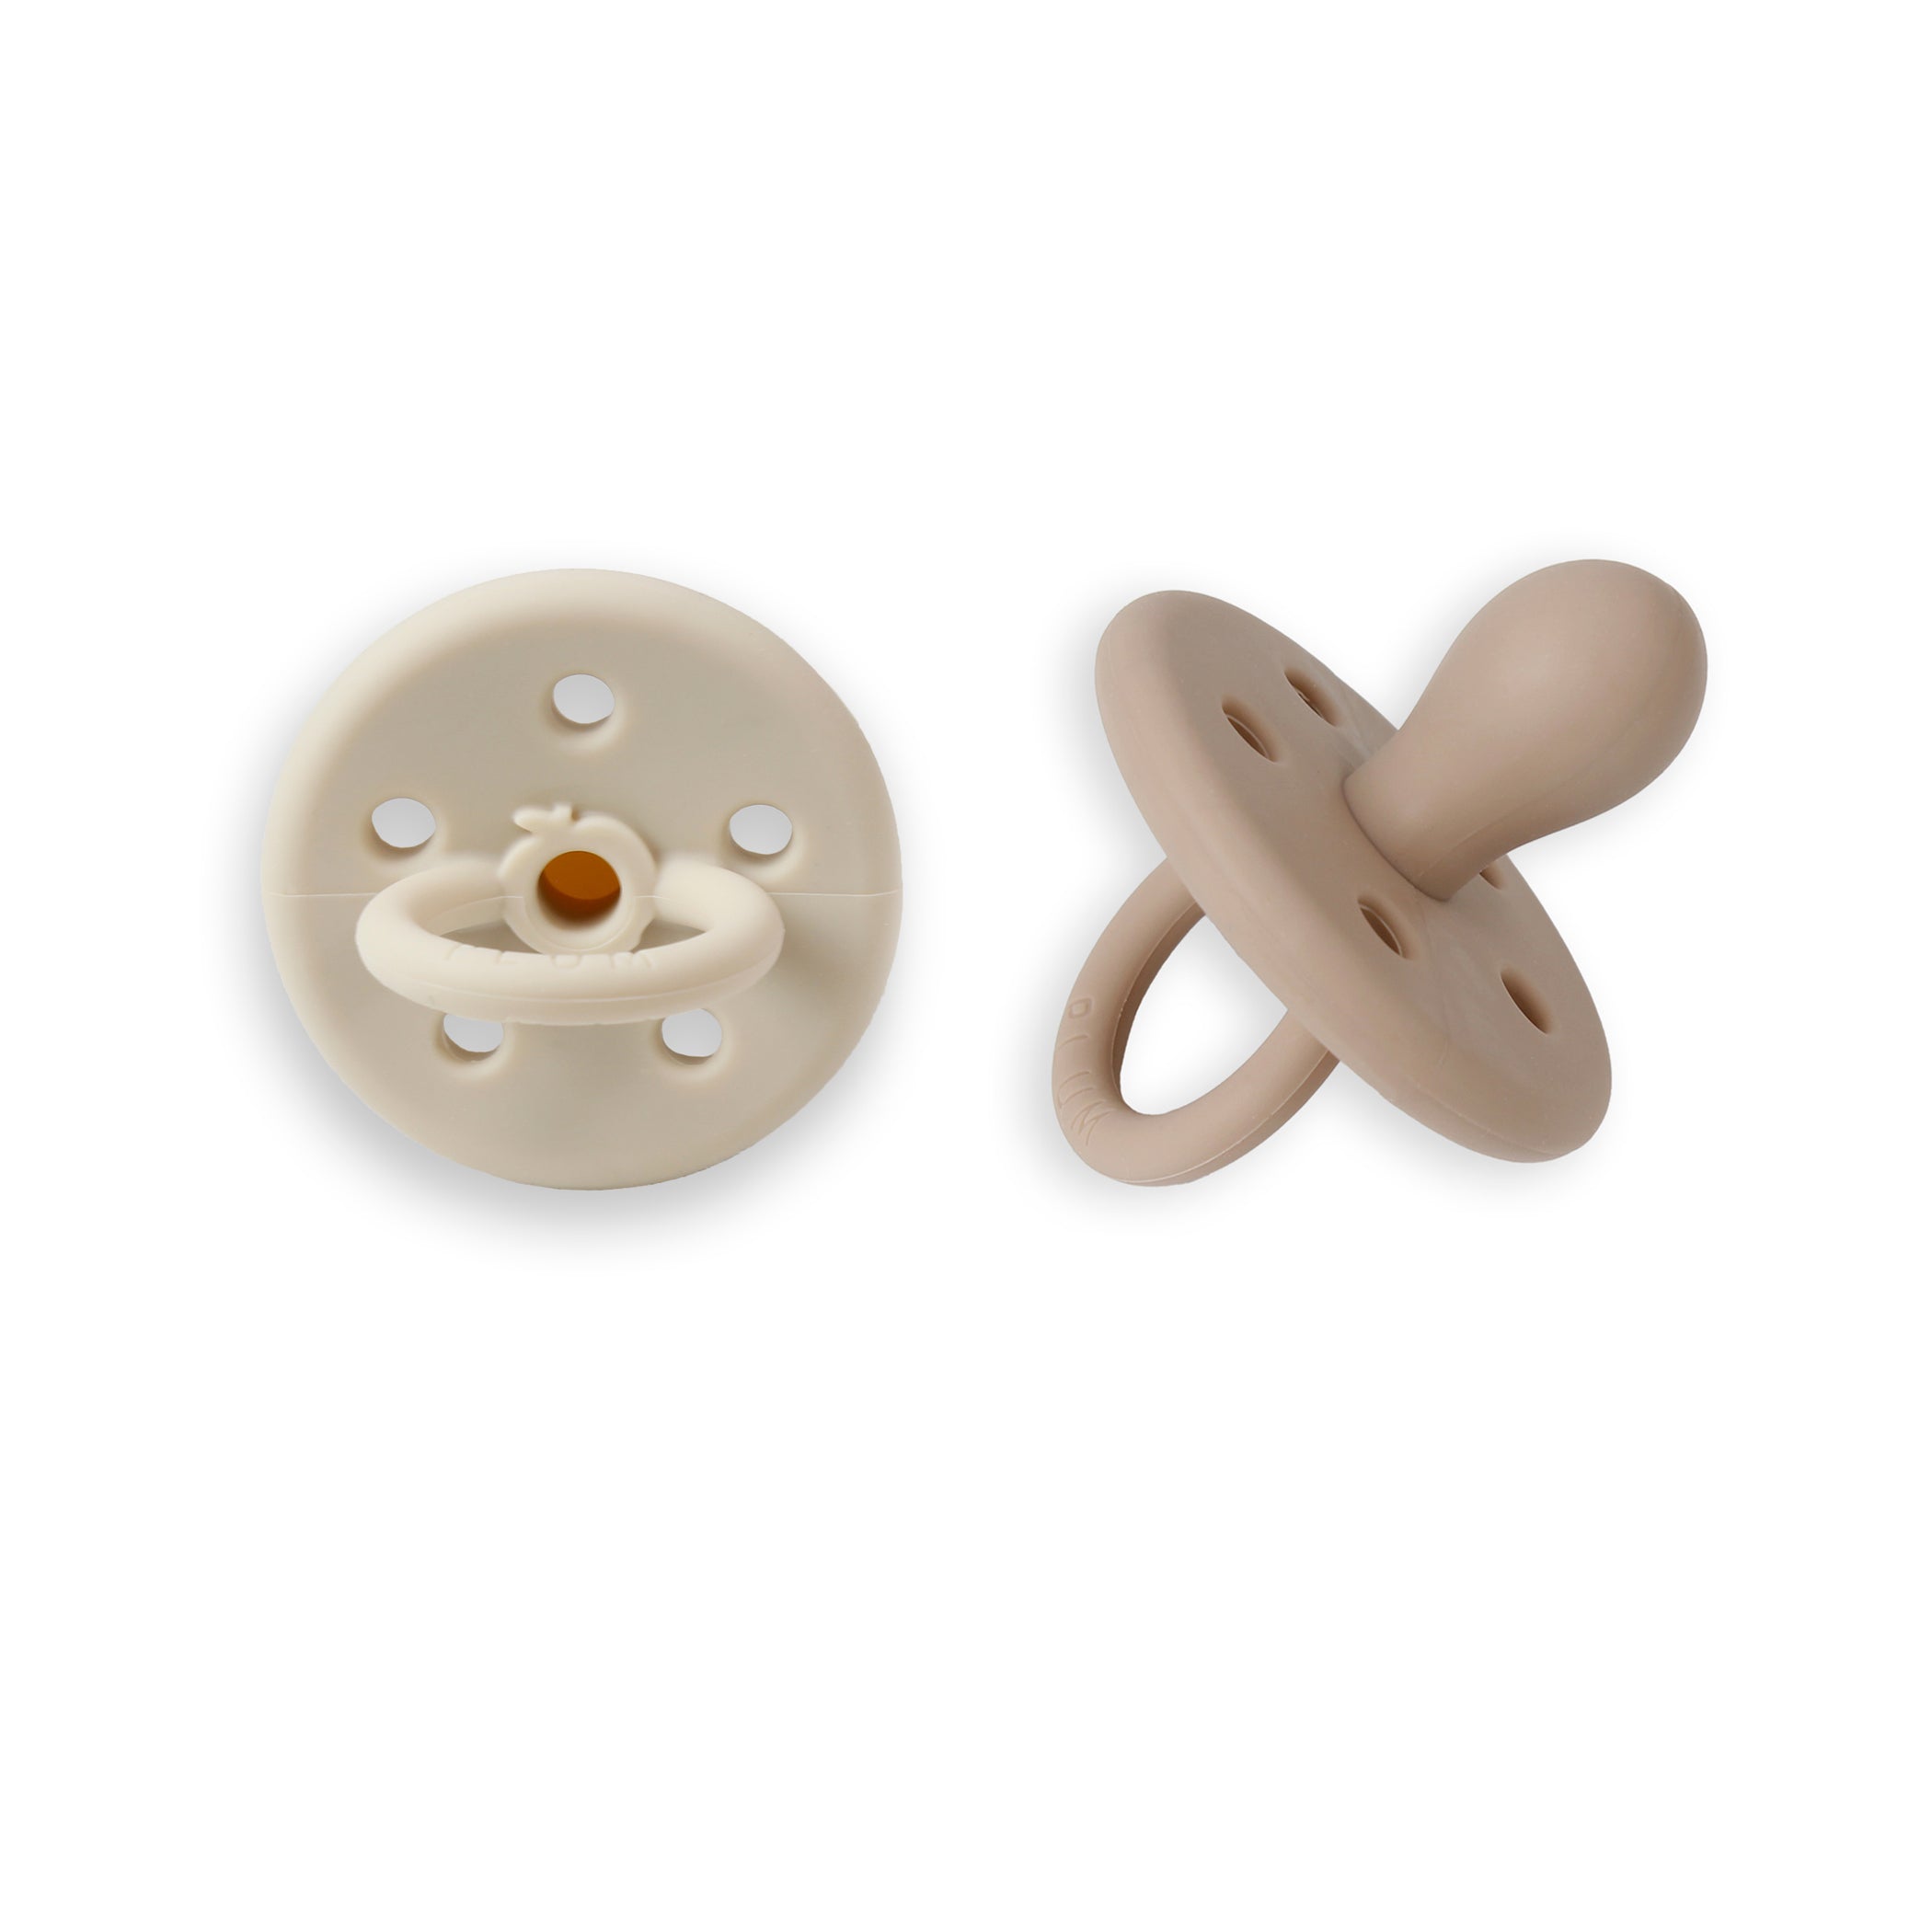 2PK Silicone Soothers - Sand & Nutmeg (0-6M)